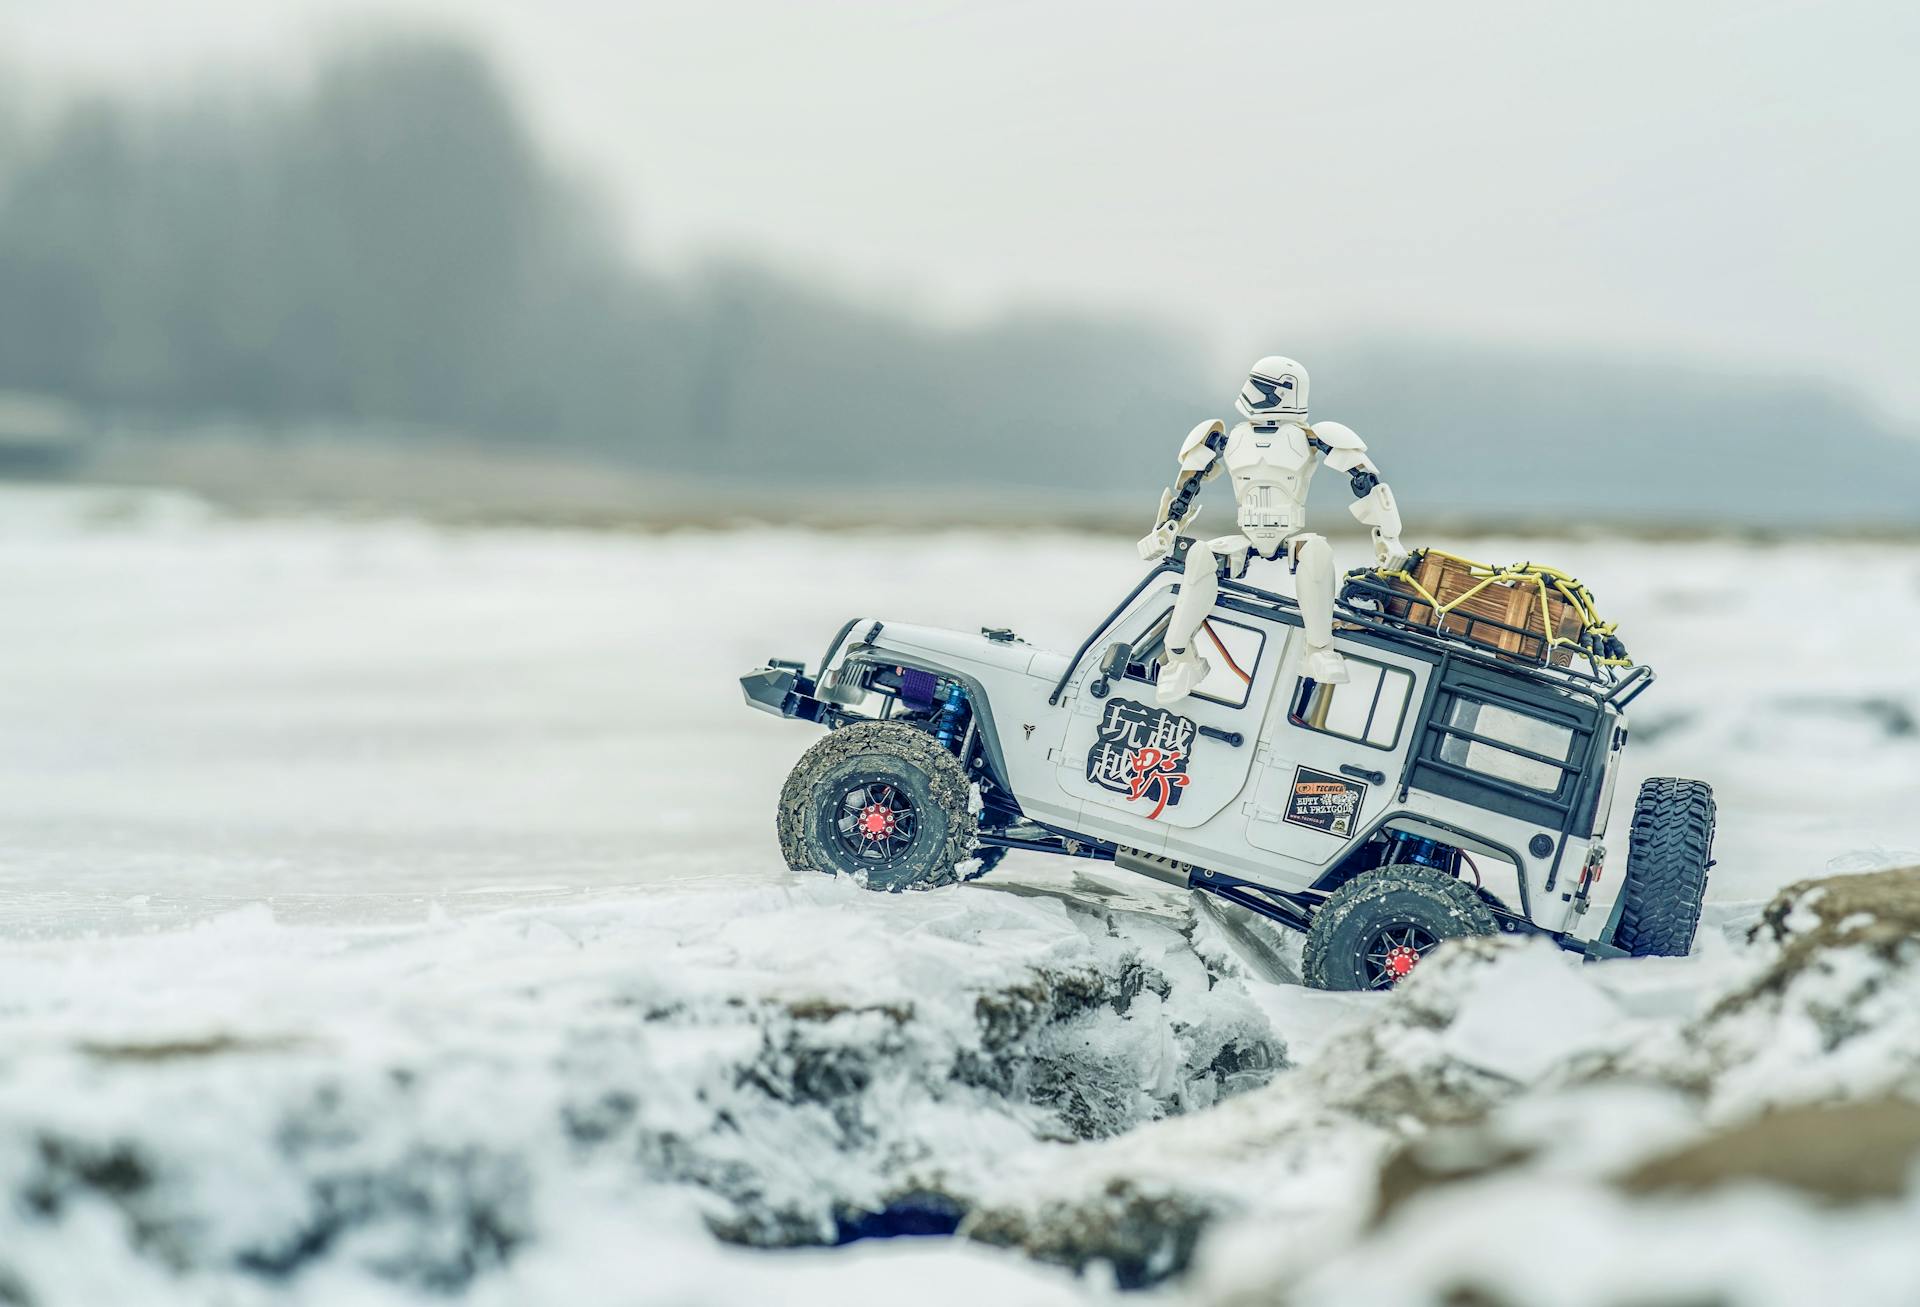 
A Scout Trooper Toy Sitting on an RC Off-Road Vehicle